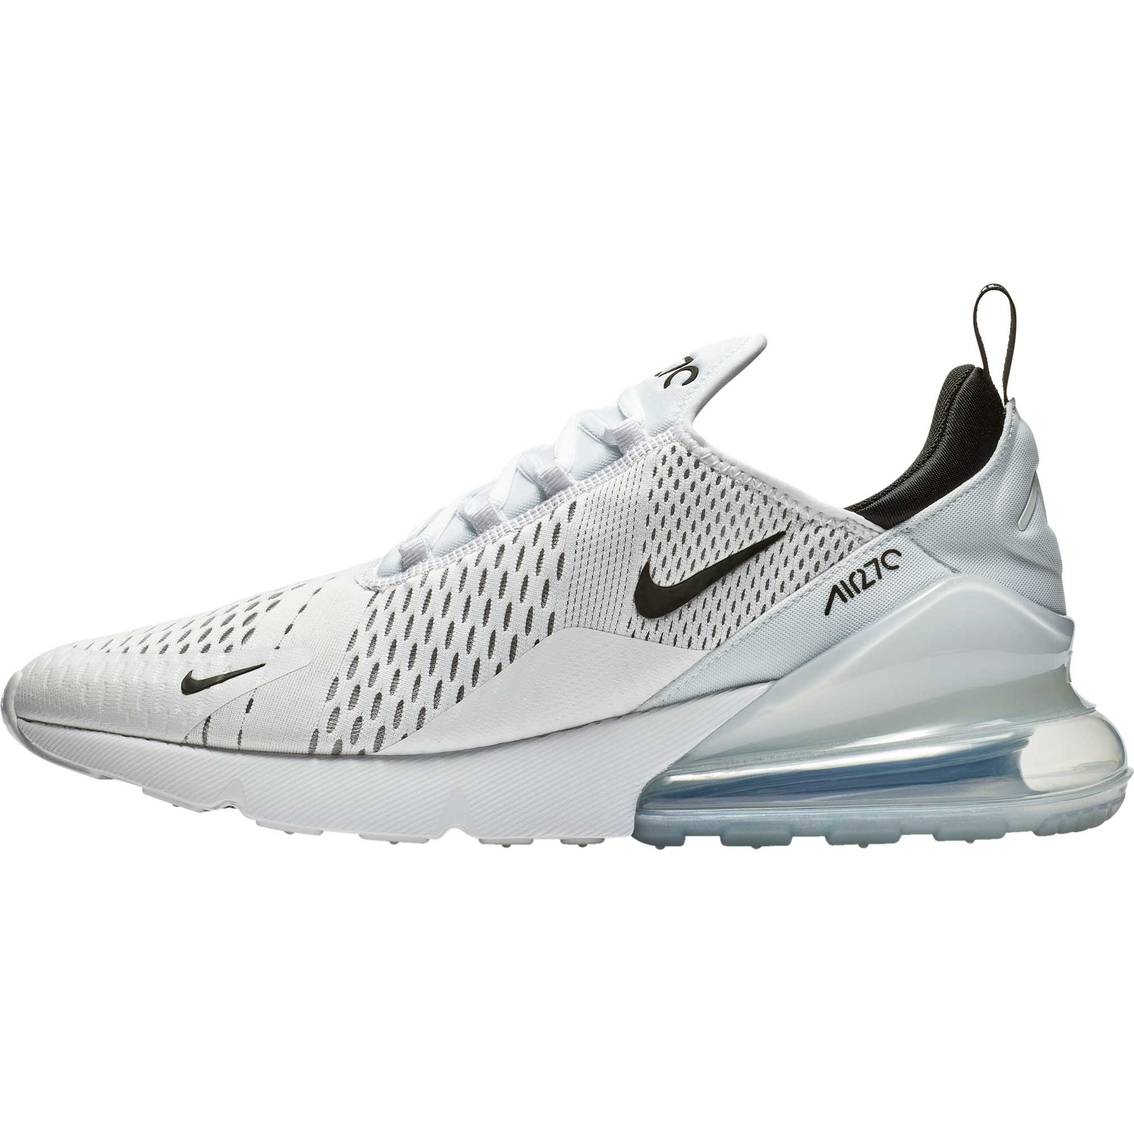 Nike Men's Air Max 270 Shoes | Sneakers | Shoes | Shop The Exchange